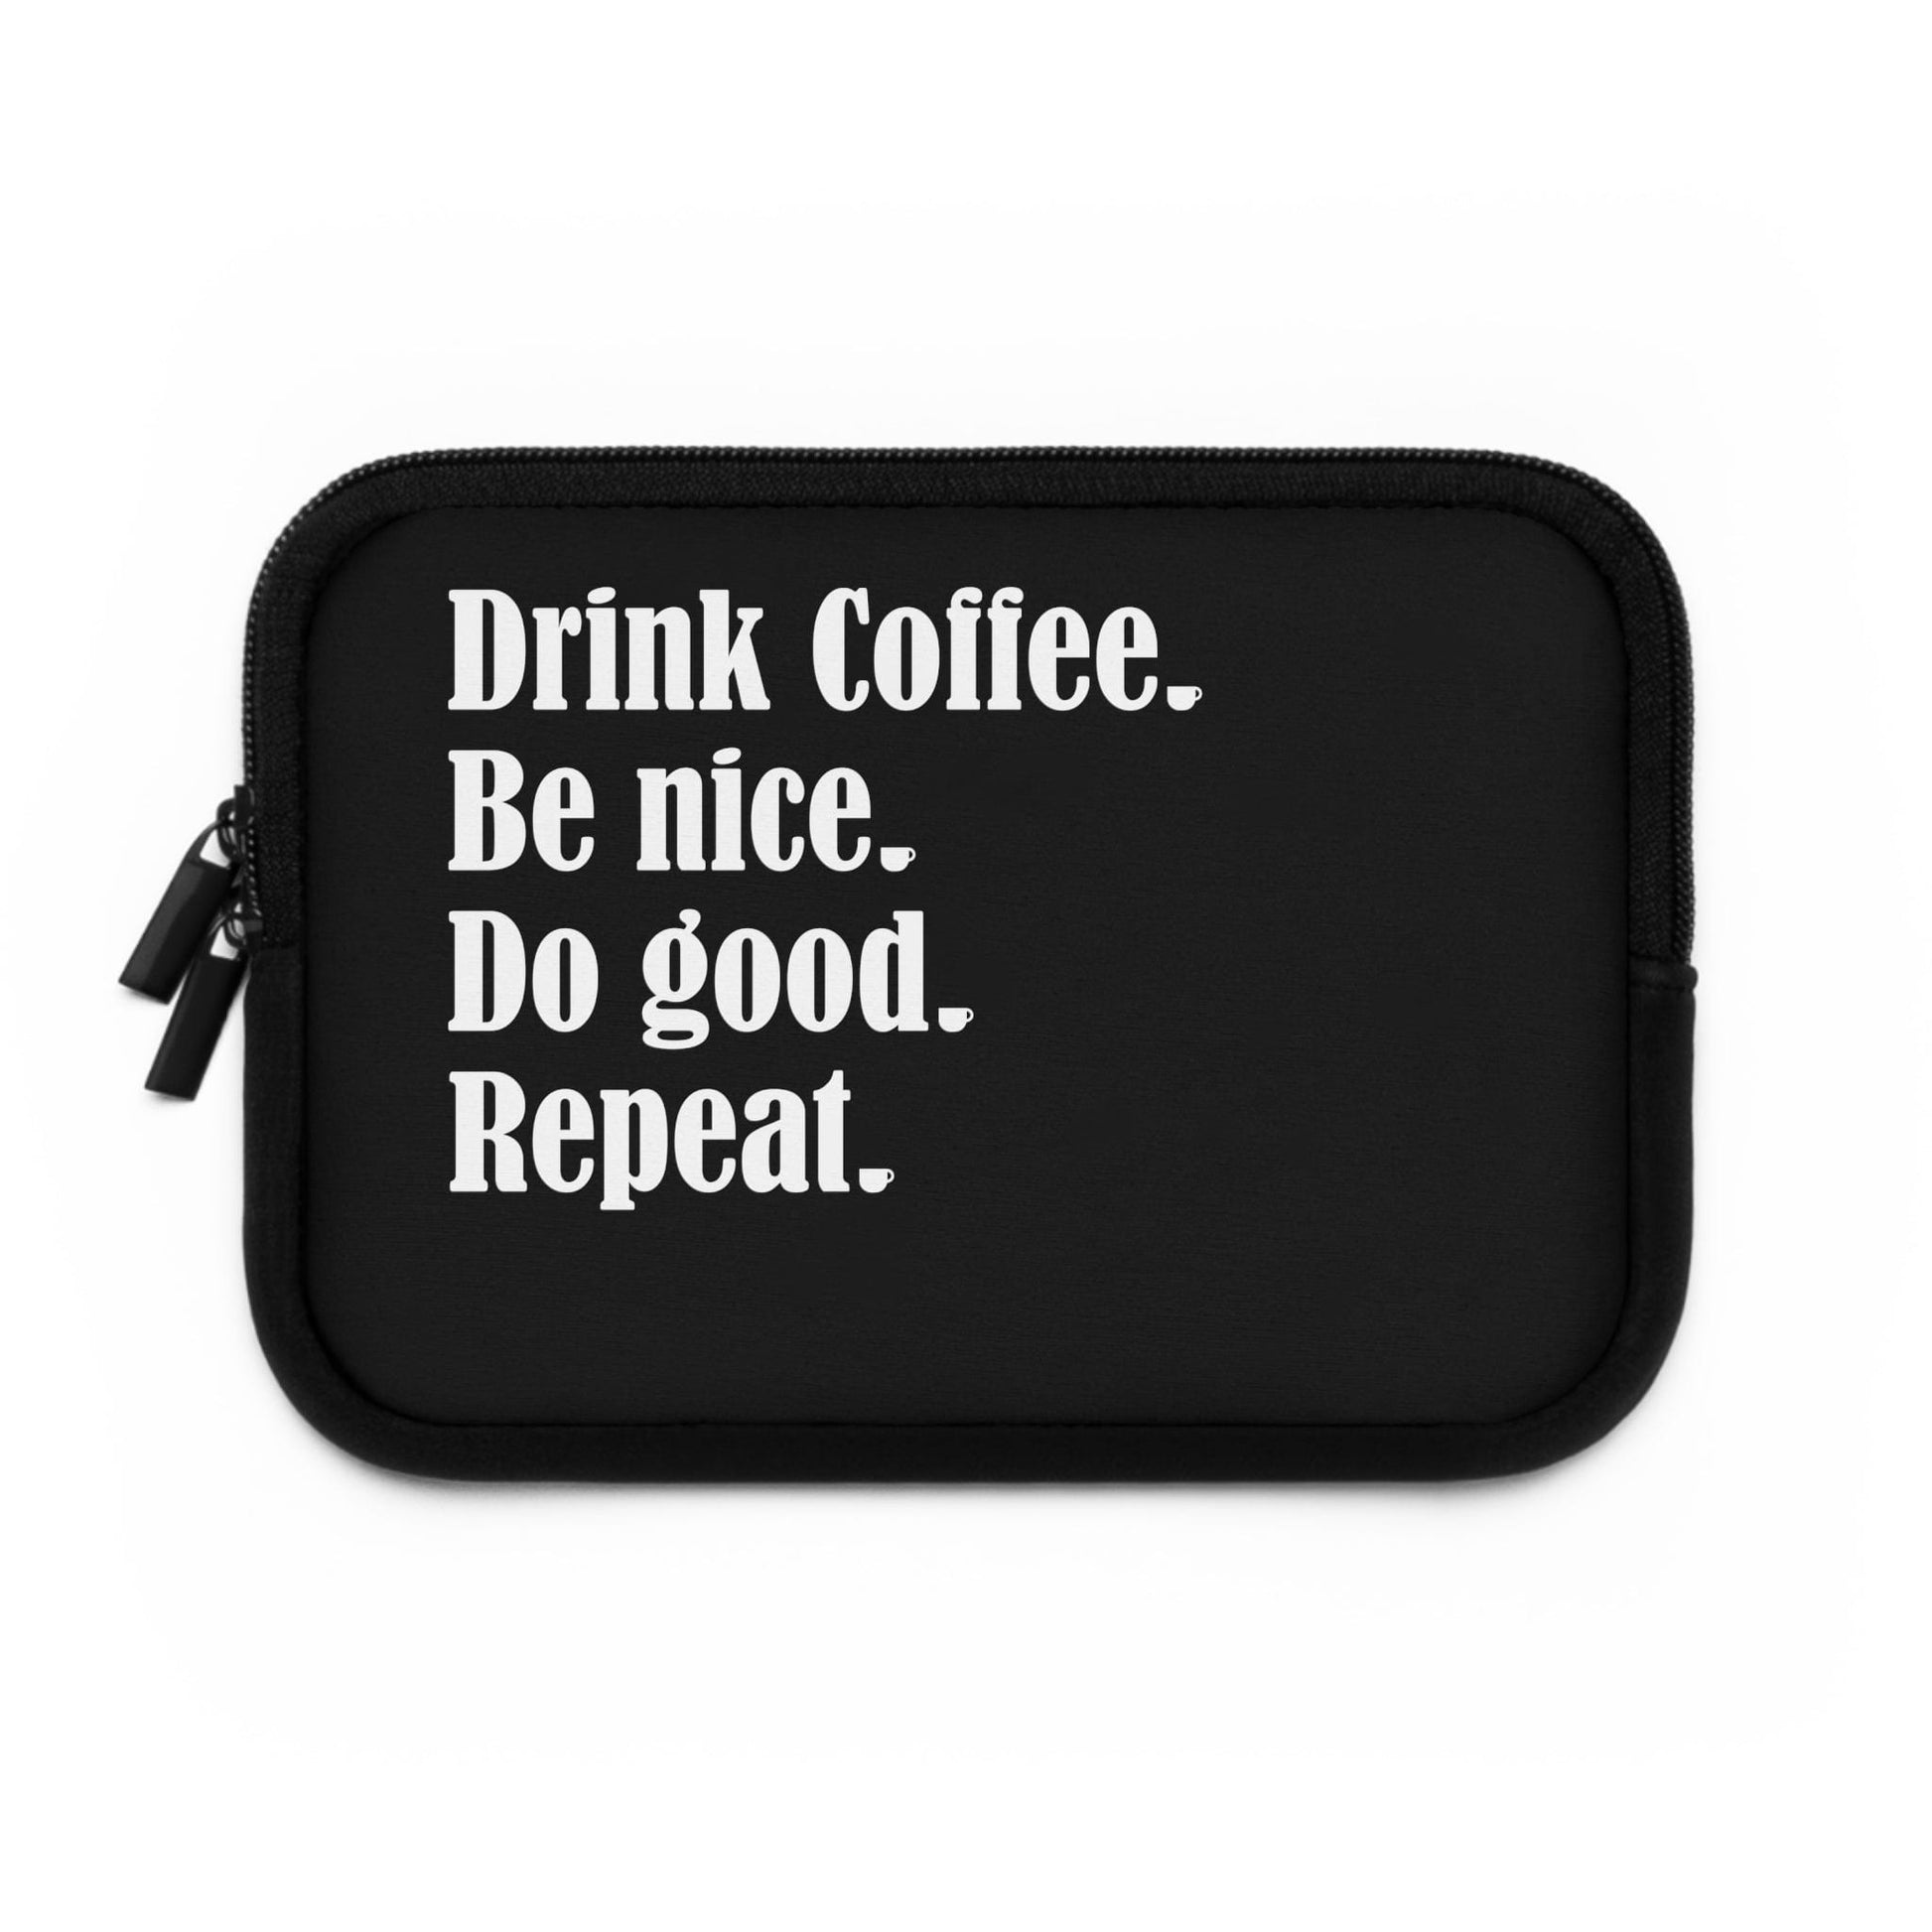 Good Bean Gifts "Drink Coffee, Be Nice, Do Good, Repeat" Laptop Sleeve Black / 7"